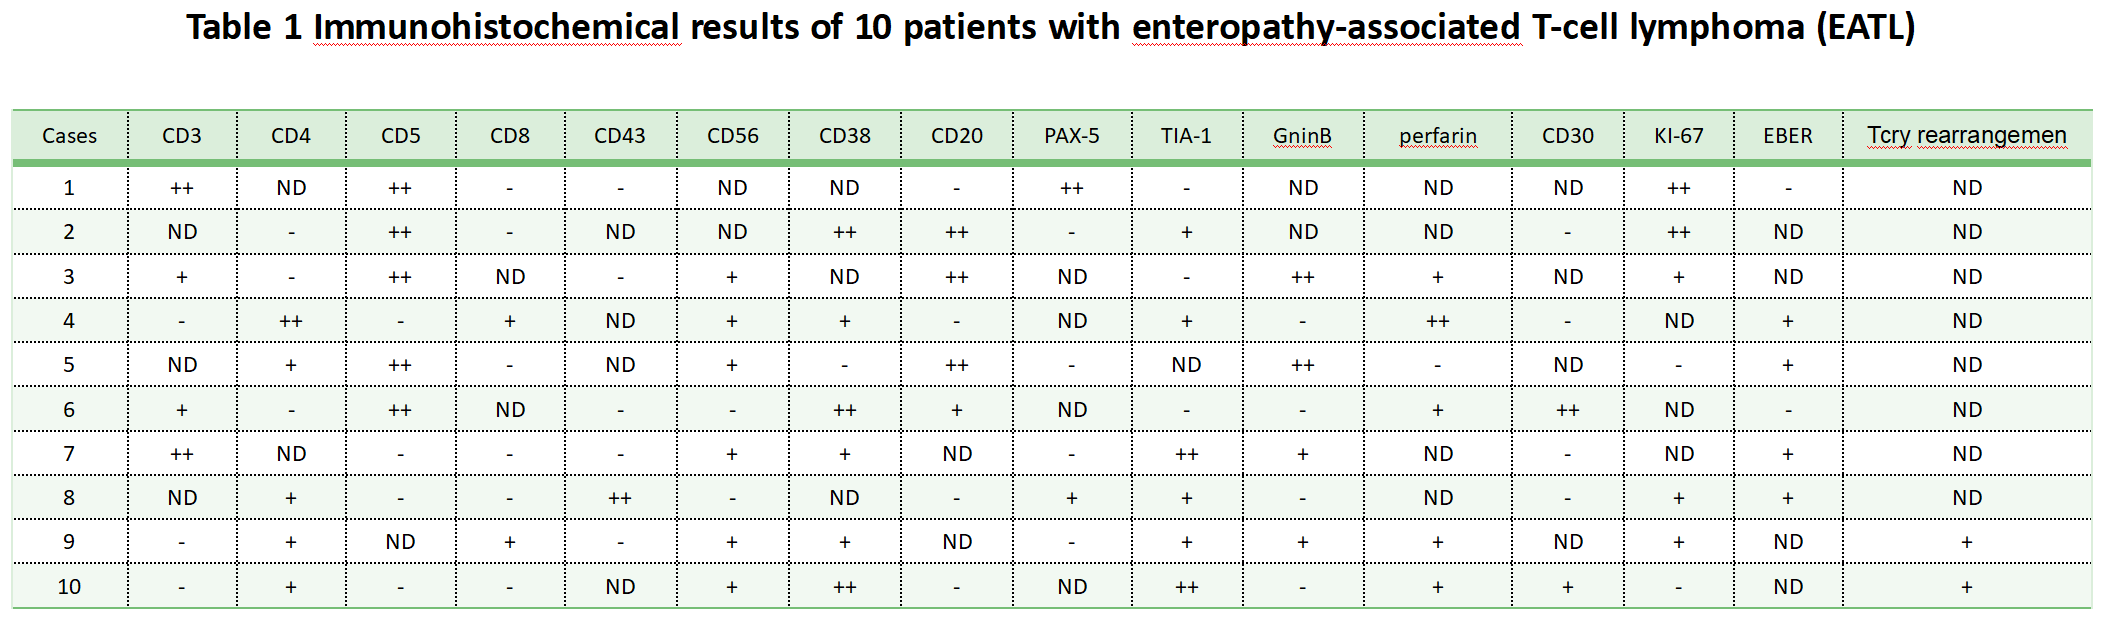 Table 1 Immunohistochemical results of 10 patients with enteropathy-associated T-cell lymphoma (EATL)